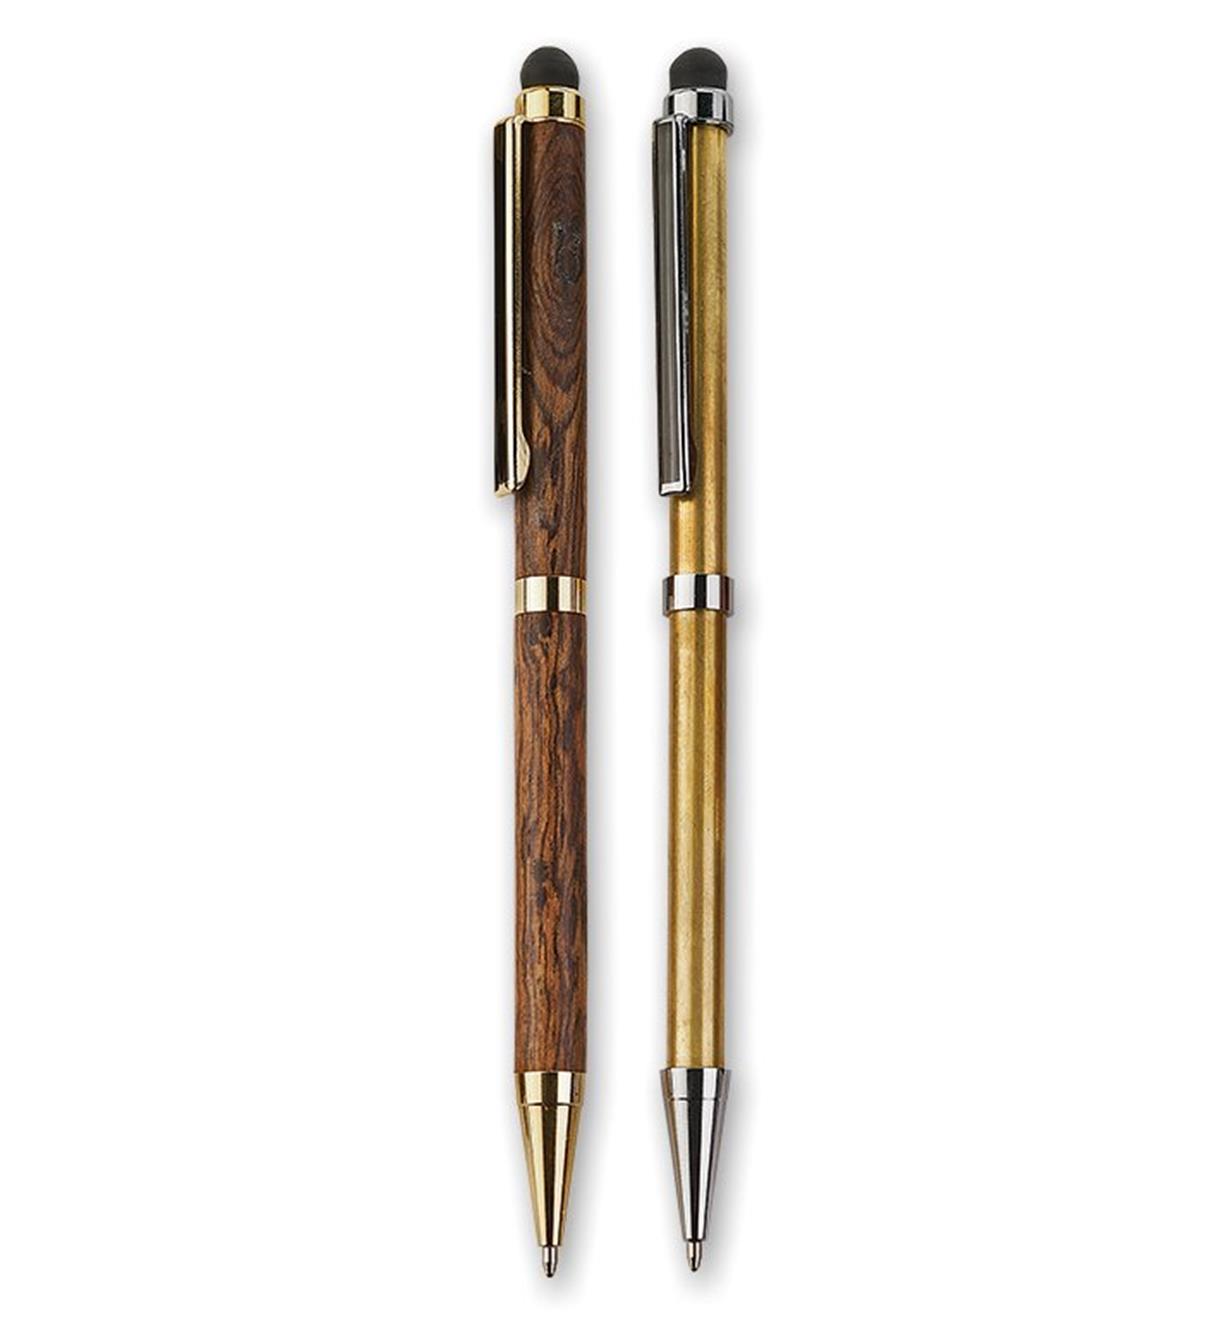 Example of completed Slim Stylus Pen beside pen hardware